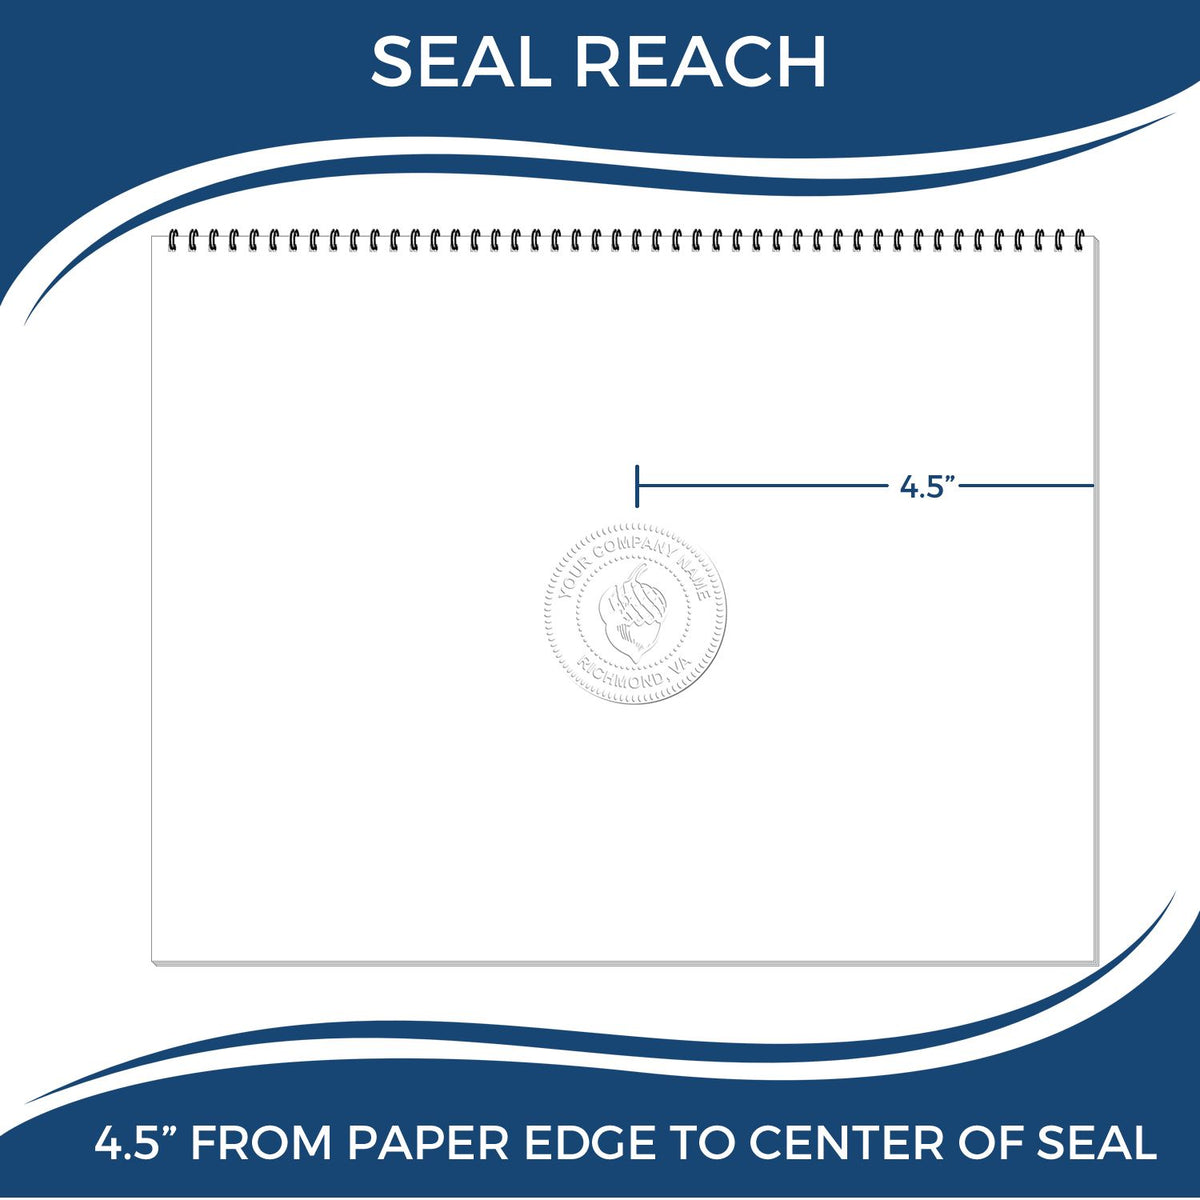 An infographic showing the seal reach which is represented by a ruler and a miniature seal image of the State of Ohio Extended Long Reach Geologist Seal